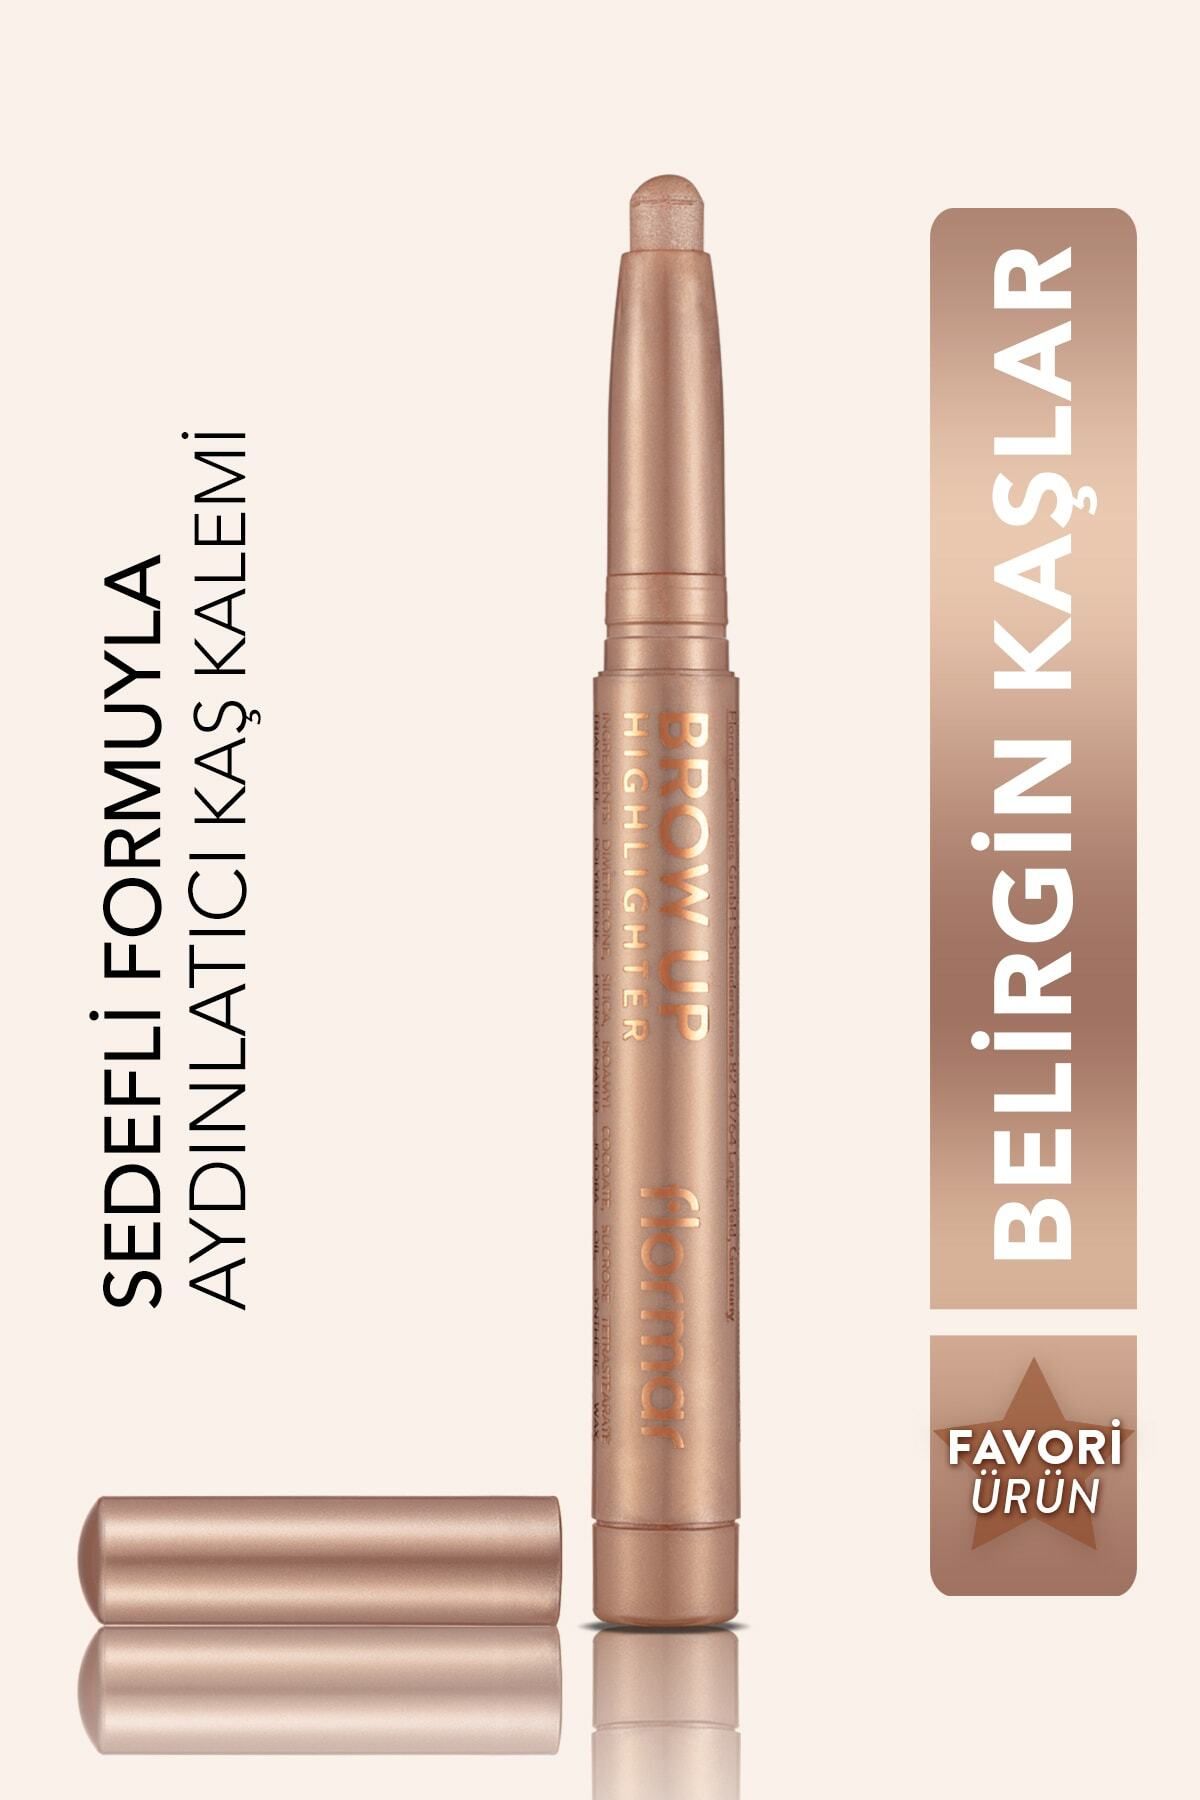 Flormar ELEVATOR HİGHLİGHTİNG EYEBROW PALE BROWN -BROW UP HİGHLİGHTER PENCİL-000 CHAMPAGNE PSSN2088